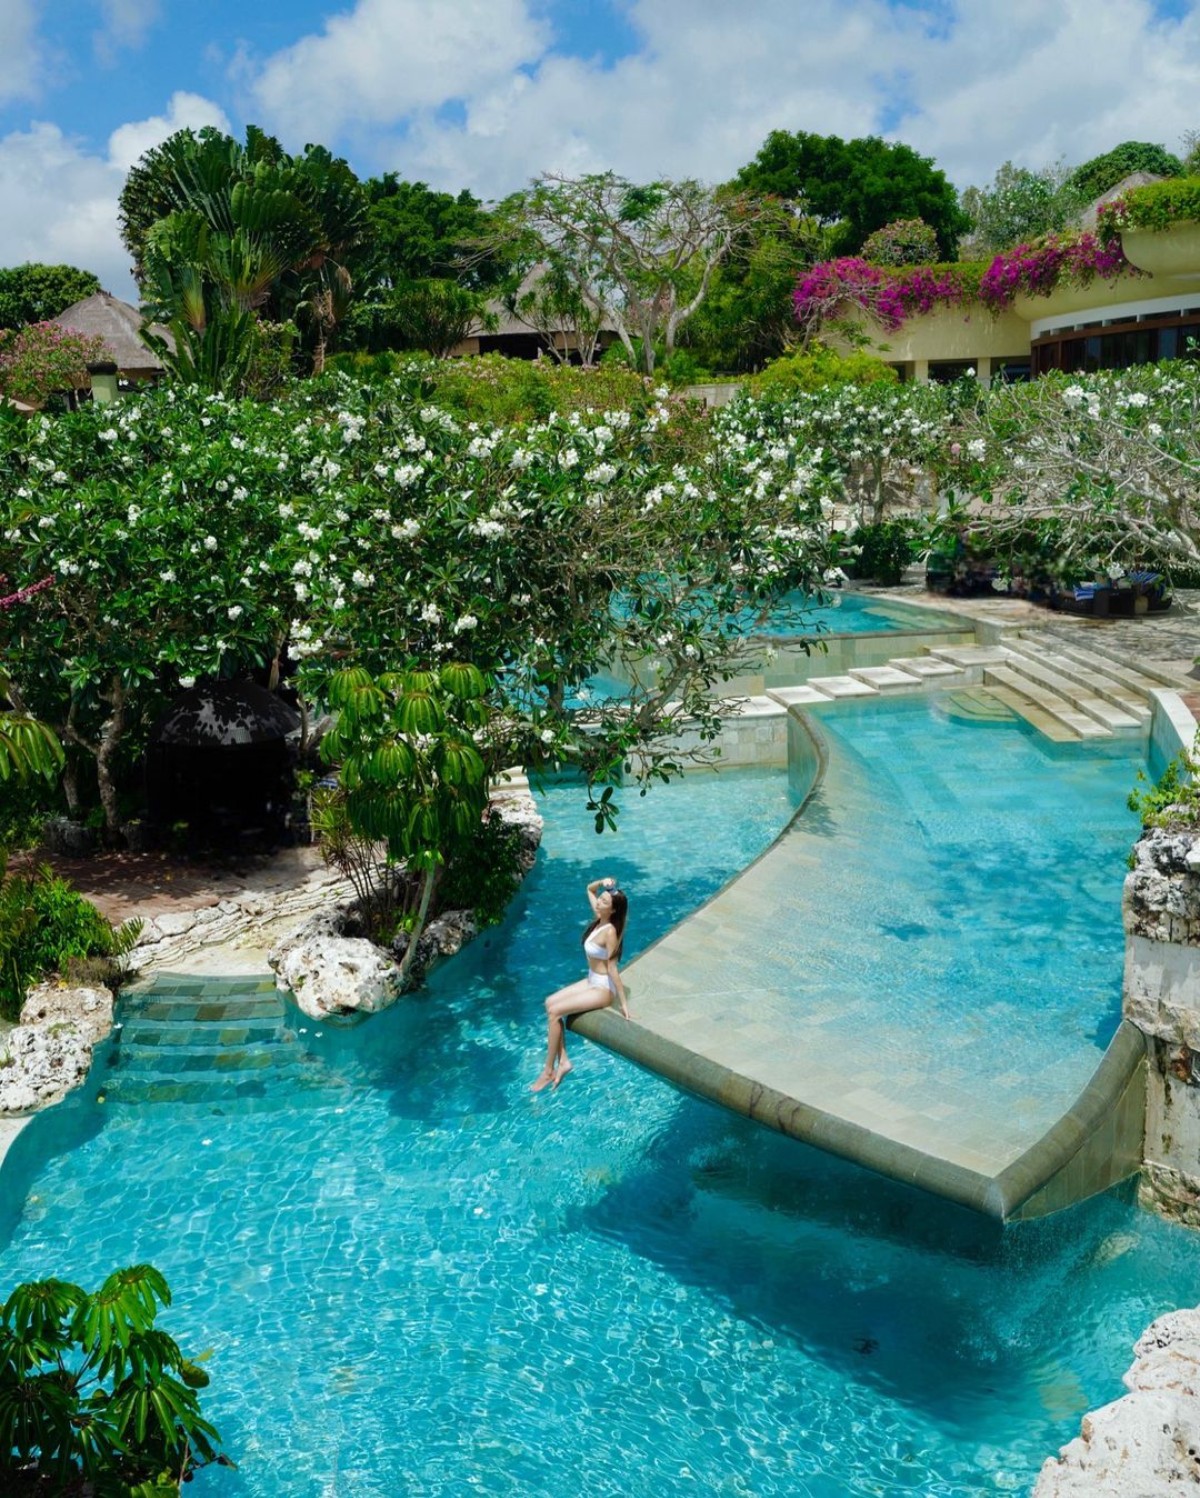 Lush gardens surround a tiered pool with a person resting on its edge in Ubud, Bali.